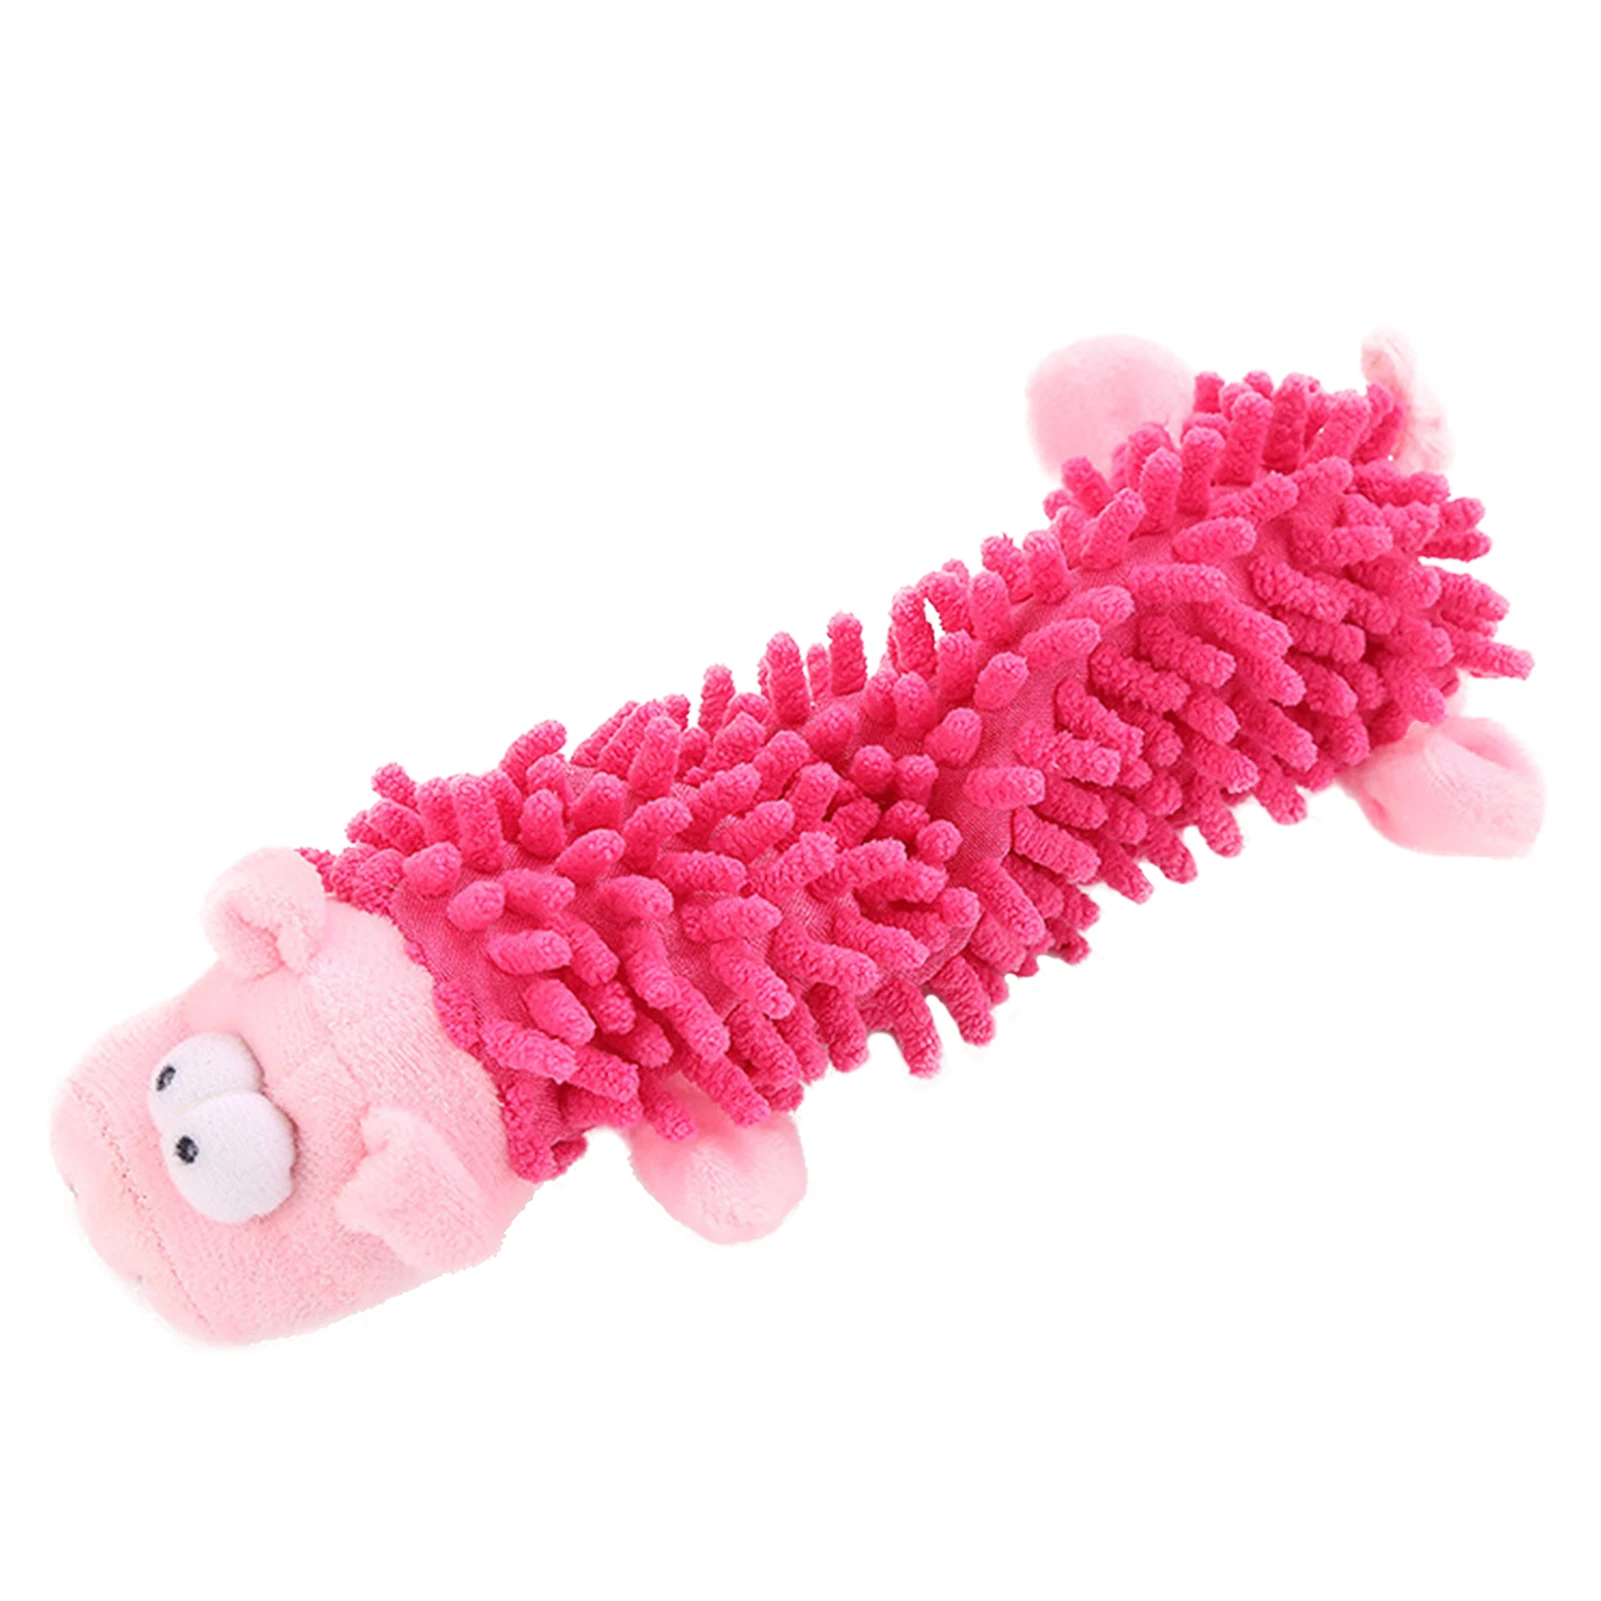 

Entertainment Pet Supplies Soft Plush Pink Pig Bite Resistant With Squeaker Lightweight Playing Interactive Dog Chew Toy